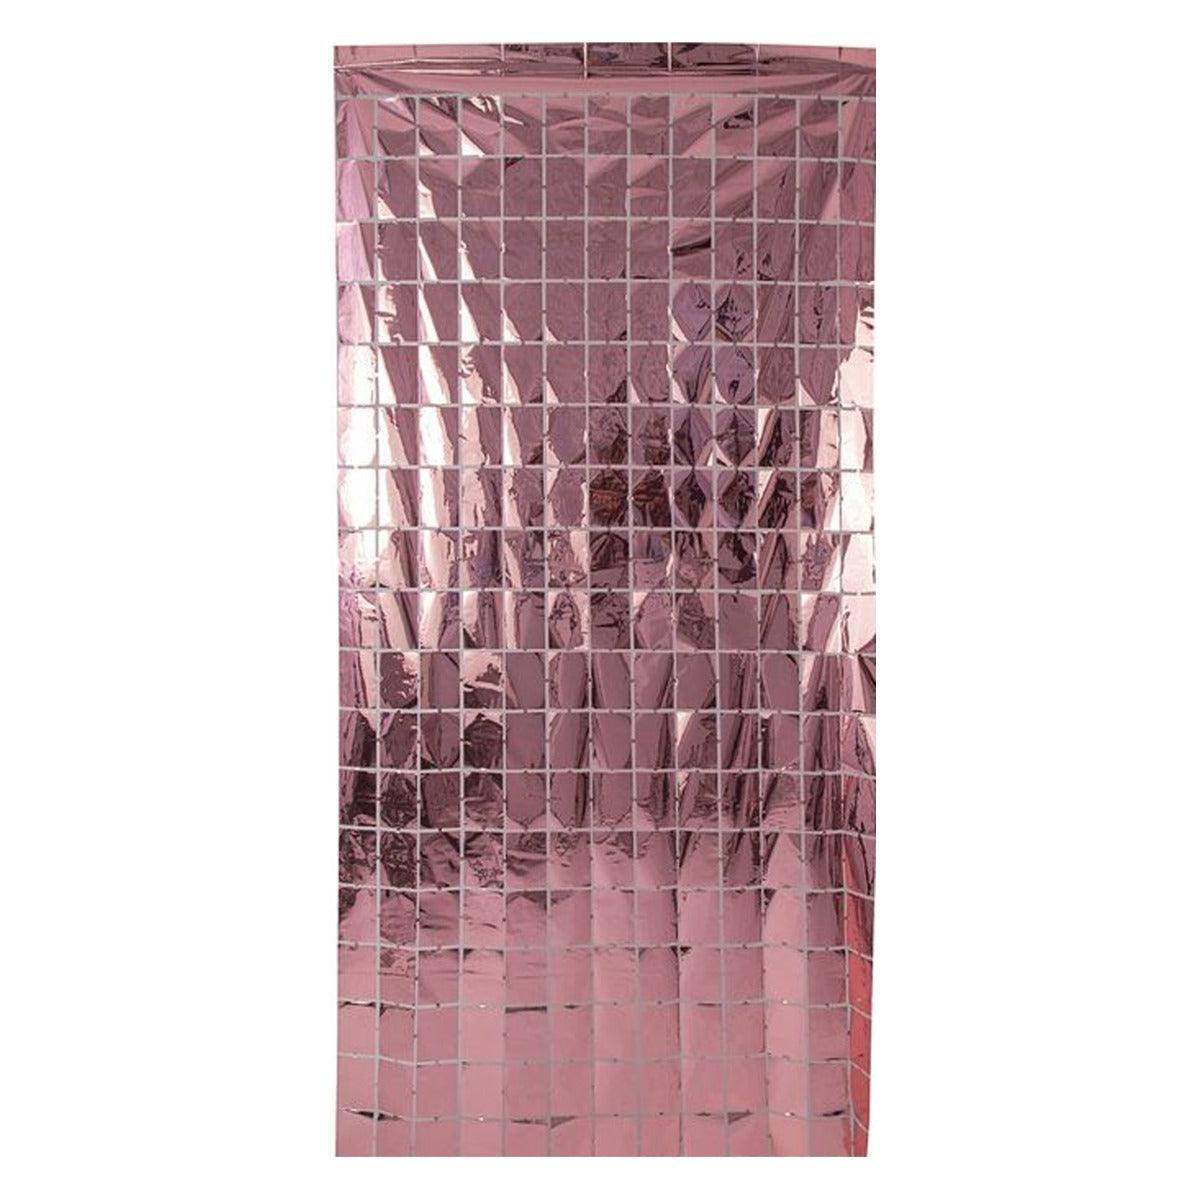 PartyCorp Square Shaped Metallic Rose Gold Foil Curtain, 1 Pack